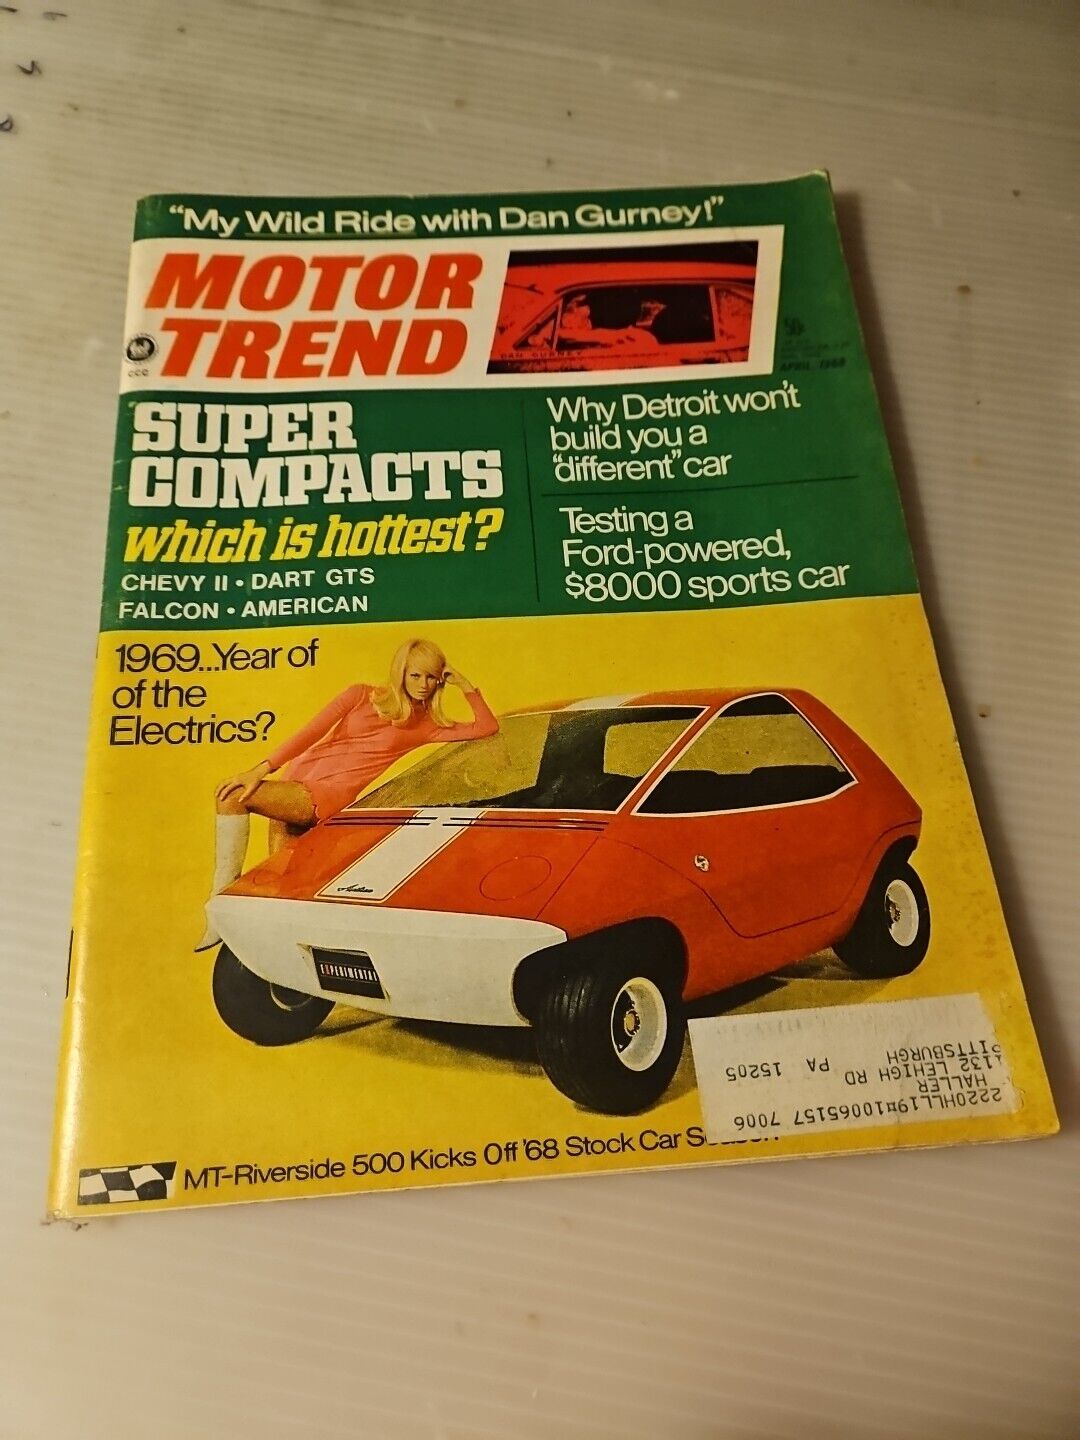 Vintage 1968 April, Motor Trend Magazine, Super Compacts, Which Is Hottest?